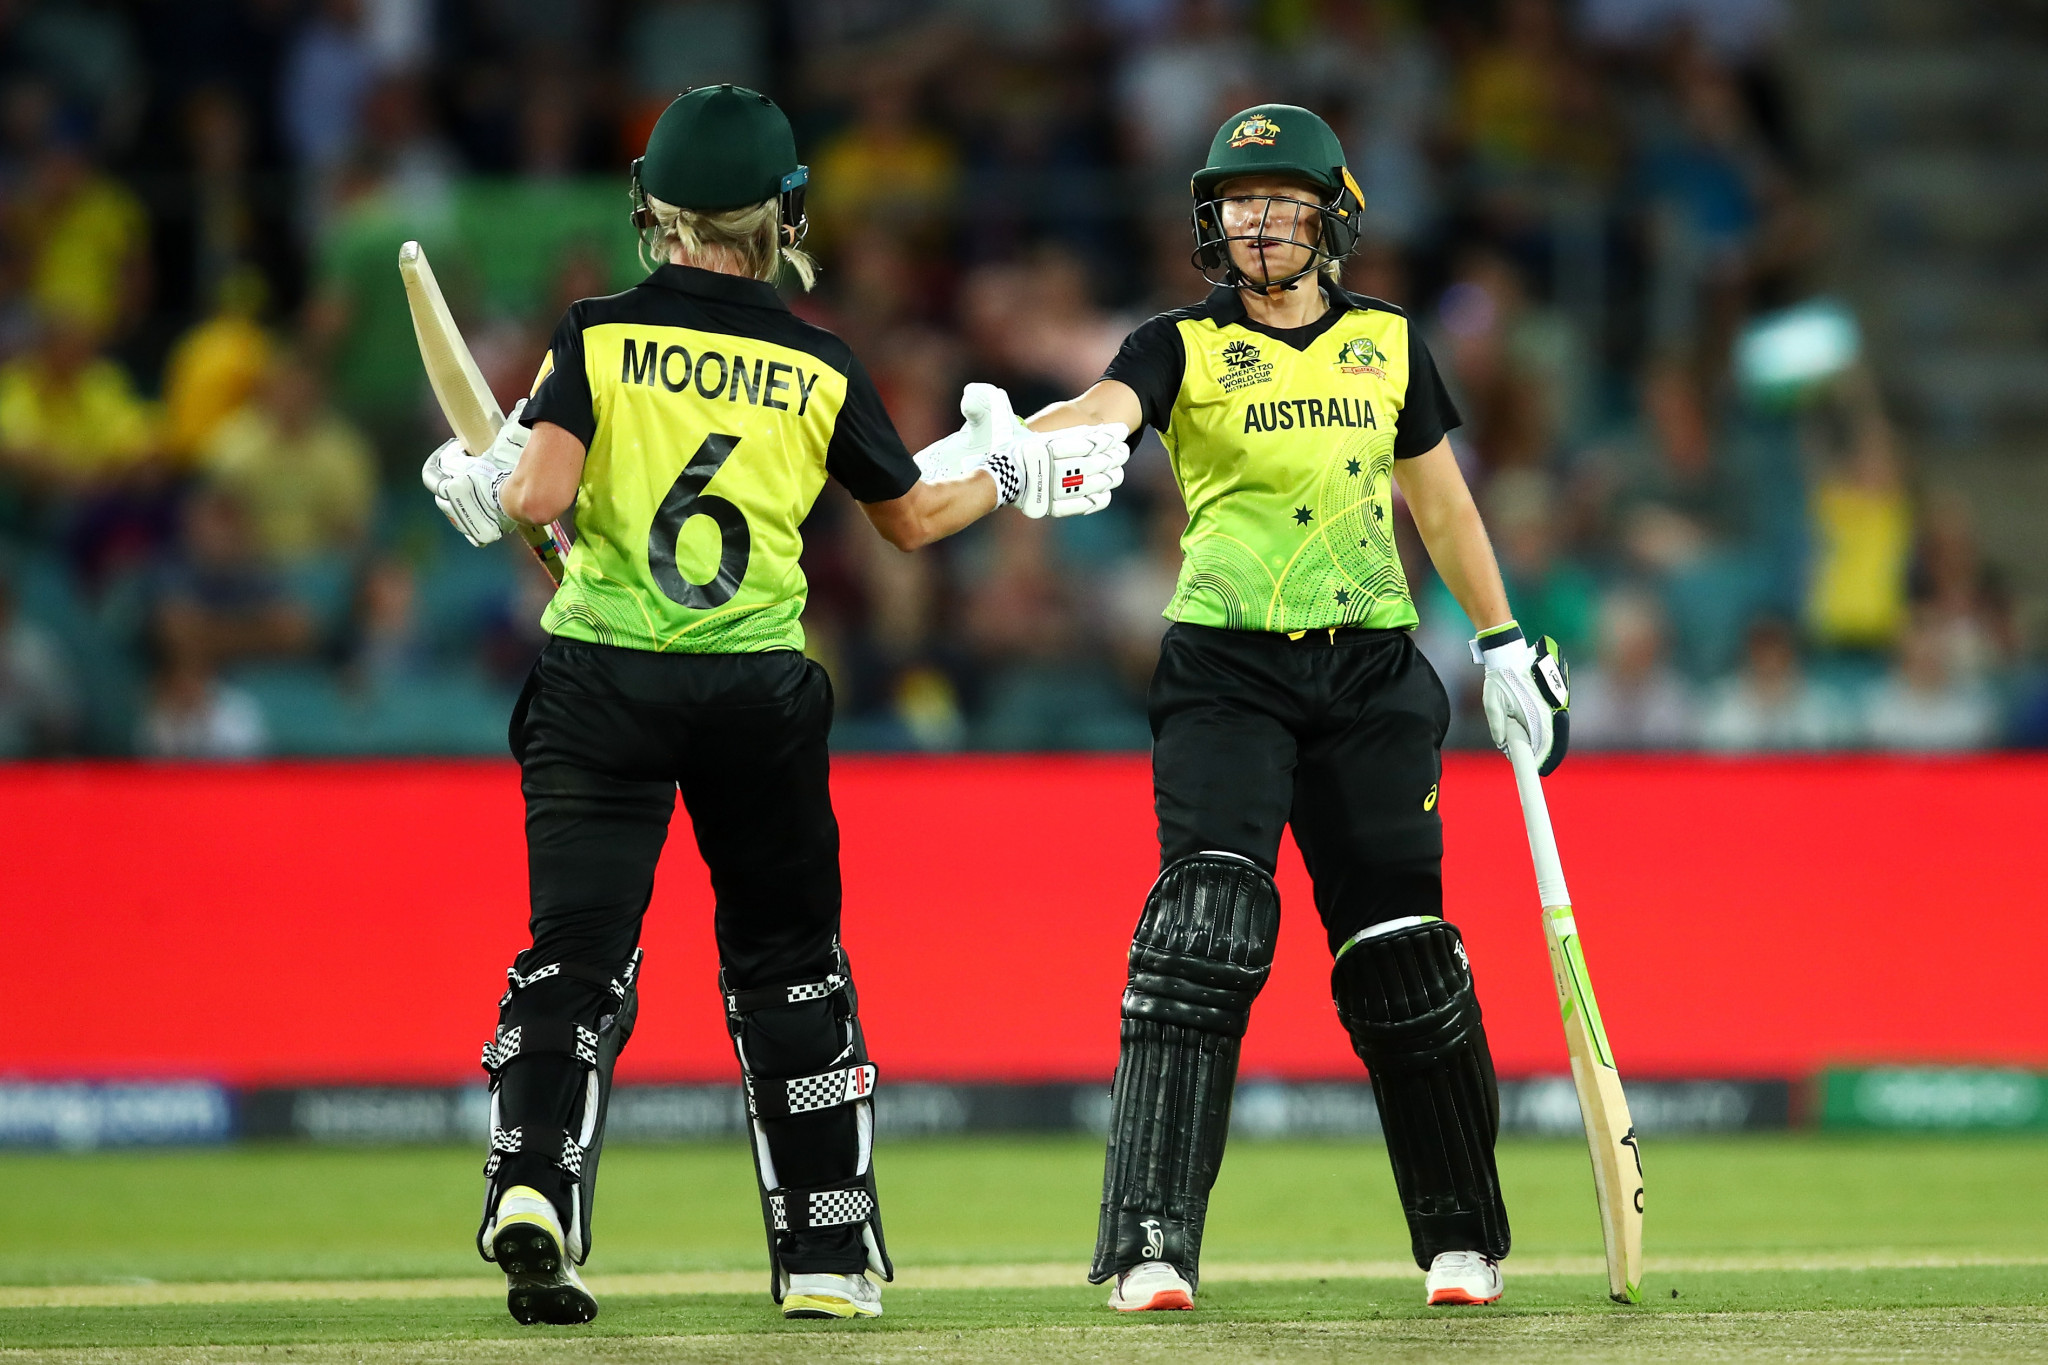 Alyssa Healy and Beth Mooney produced a massive opening partnership in Australia's win over Bangladesh ©Getty Images